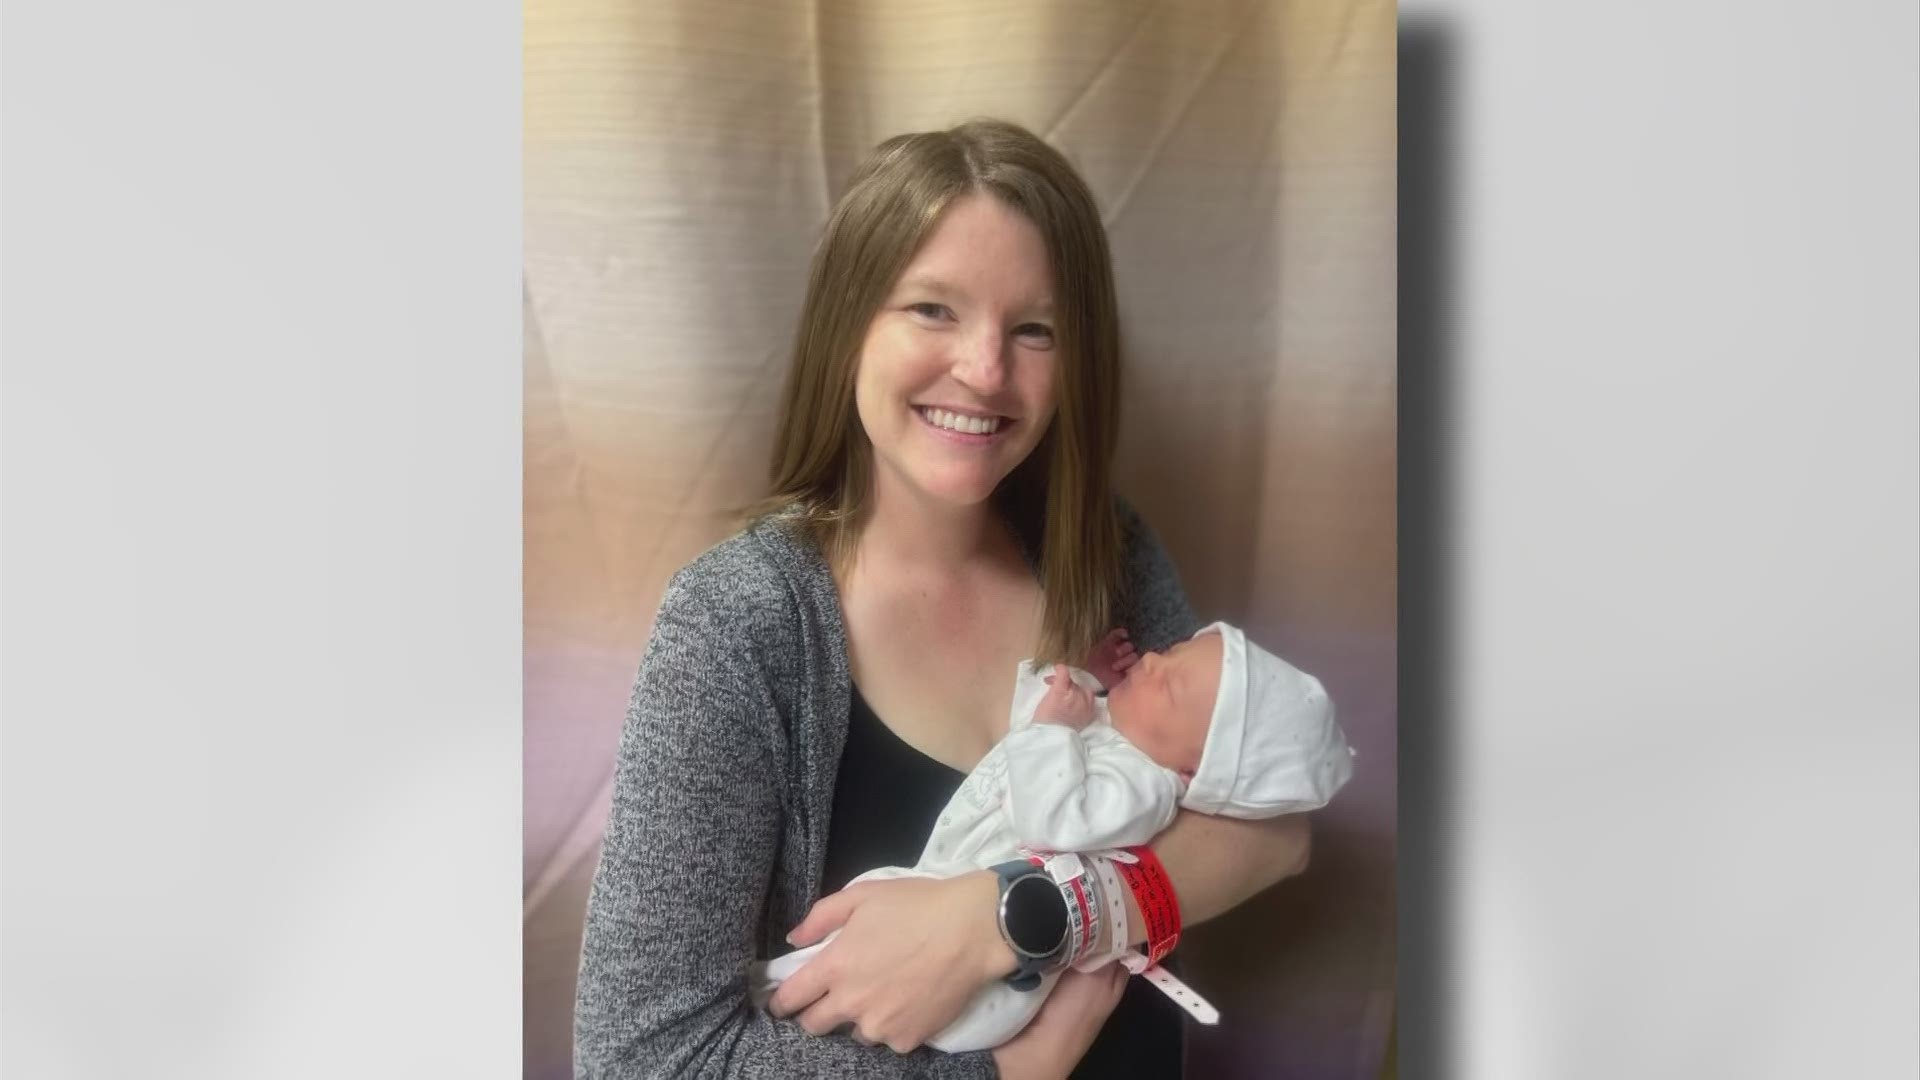 A woman who received the COVID vaccine while pregnant says she and her baby are doing great.